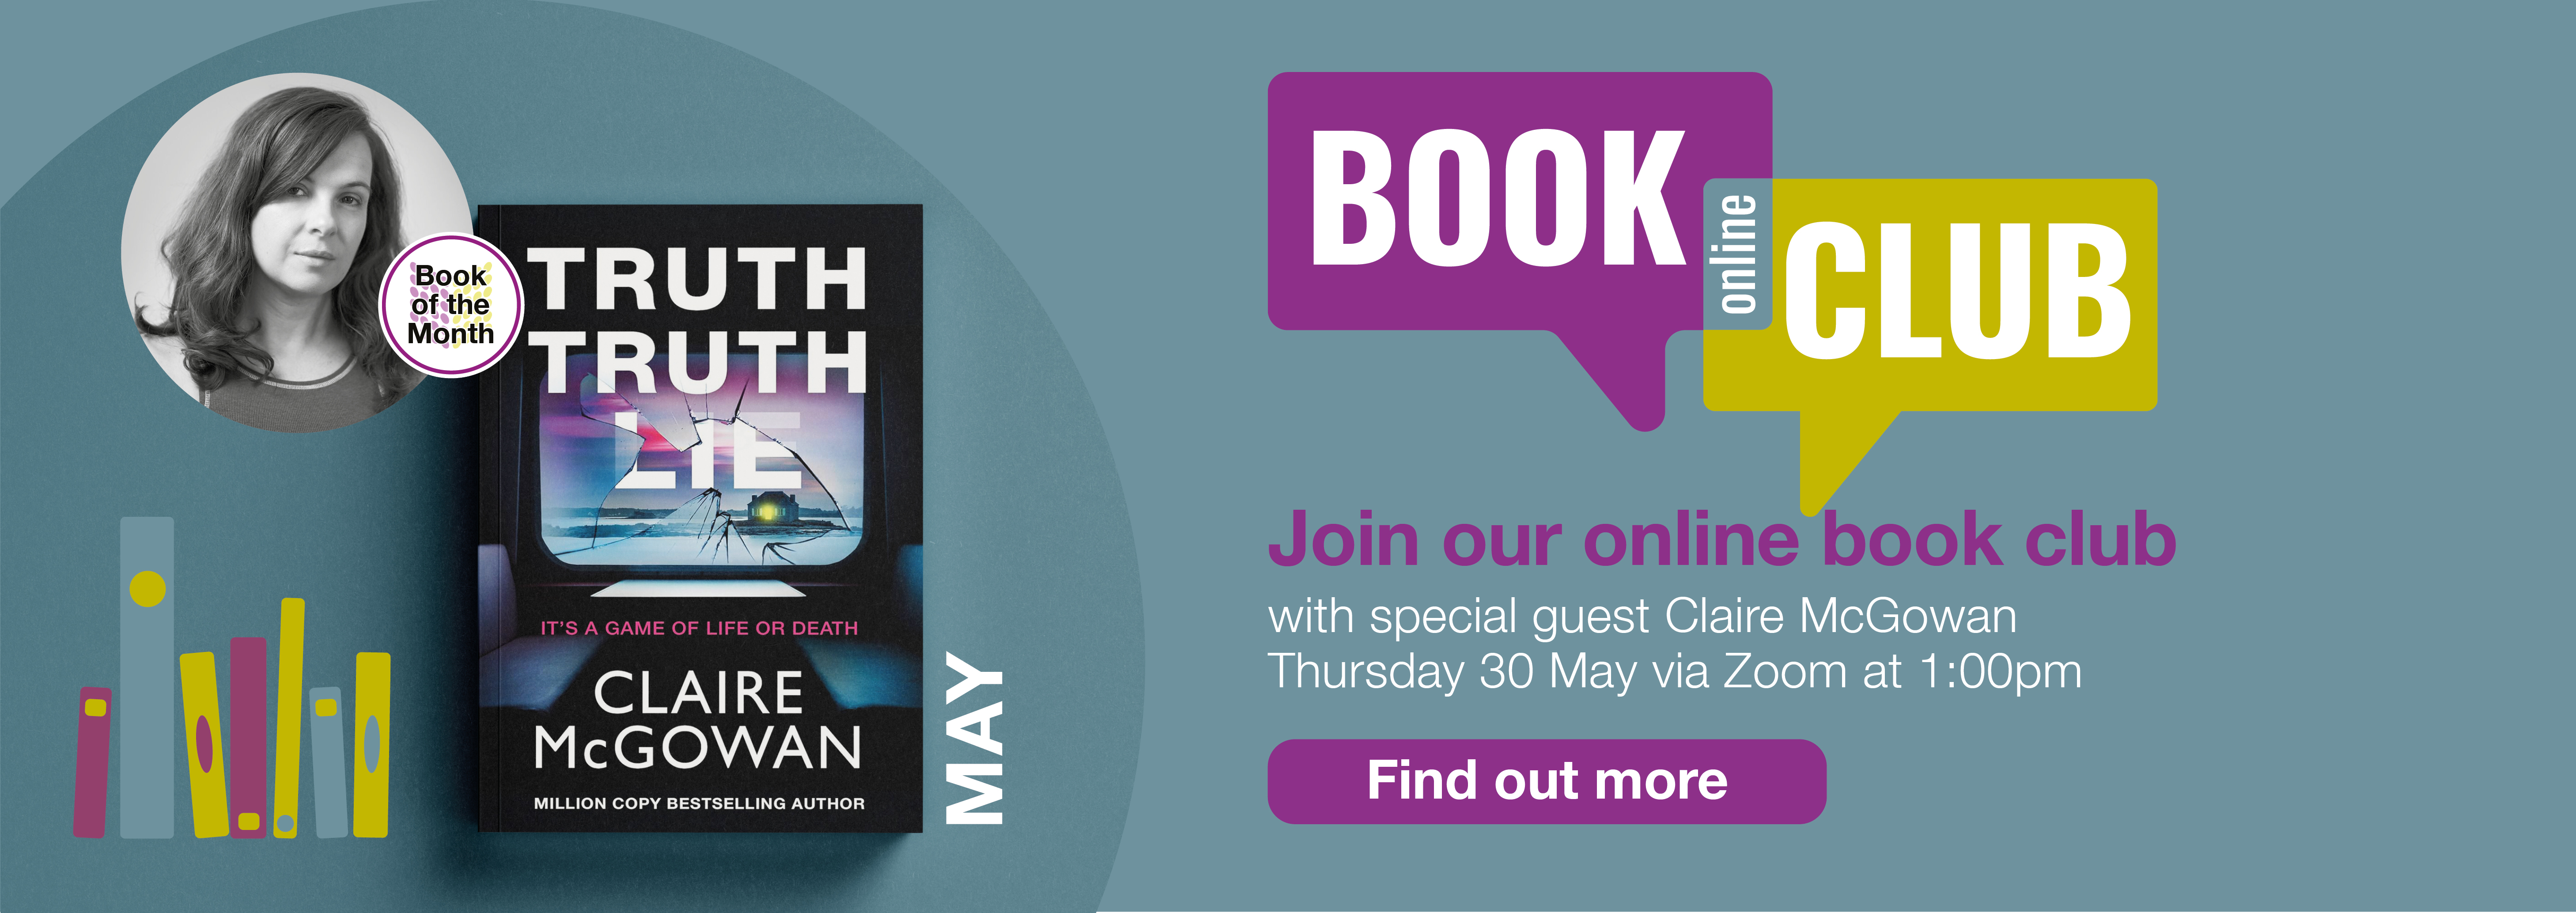 Home page banner 3 Join our online Book Club with special guest author Claire McGowan on Thursday 30th May via Zoom at 1pm. Claire will talk about her new book Truth Truth Lie